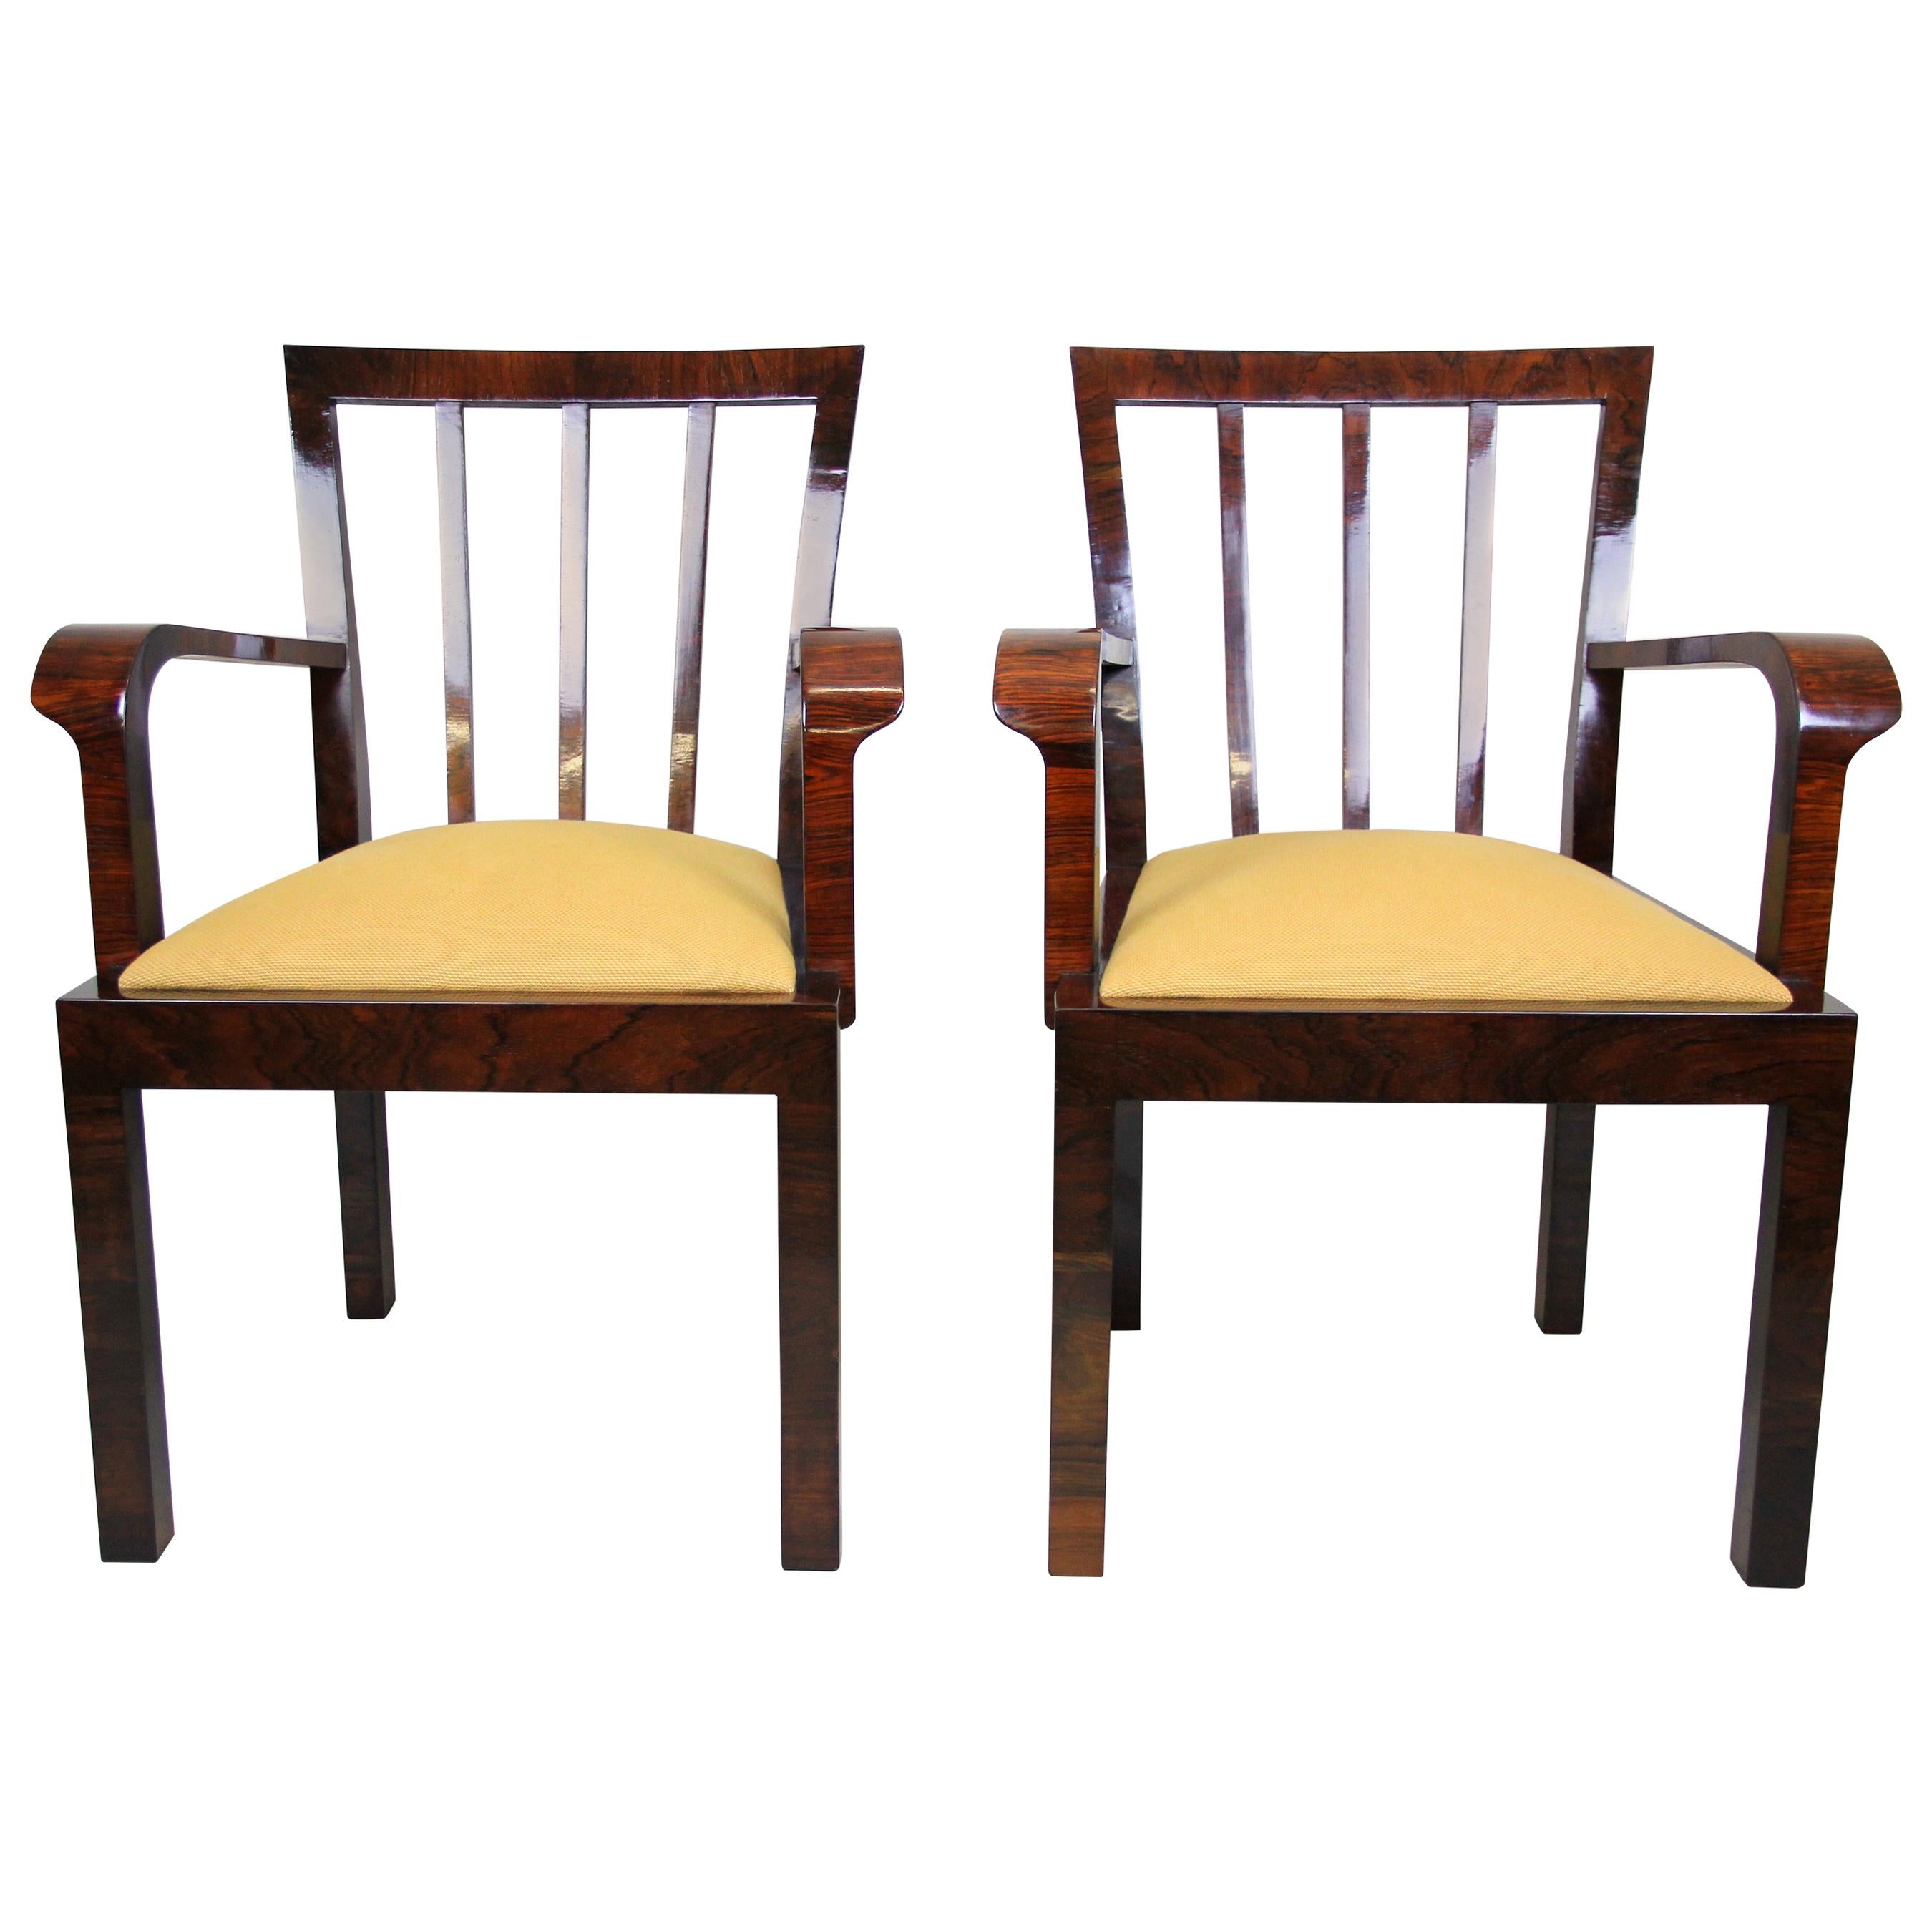 Pair of Art Deco Chairs Newly Upholstered, Austria, circa 1930